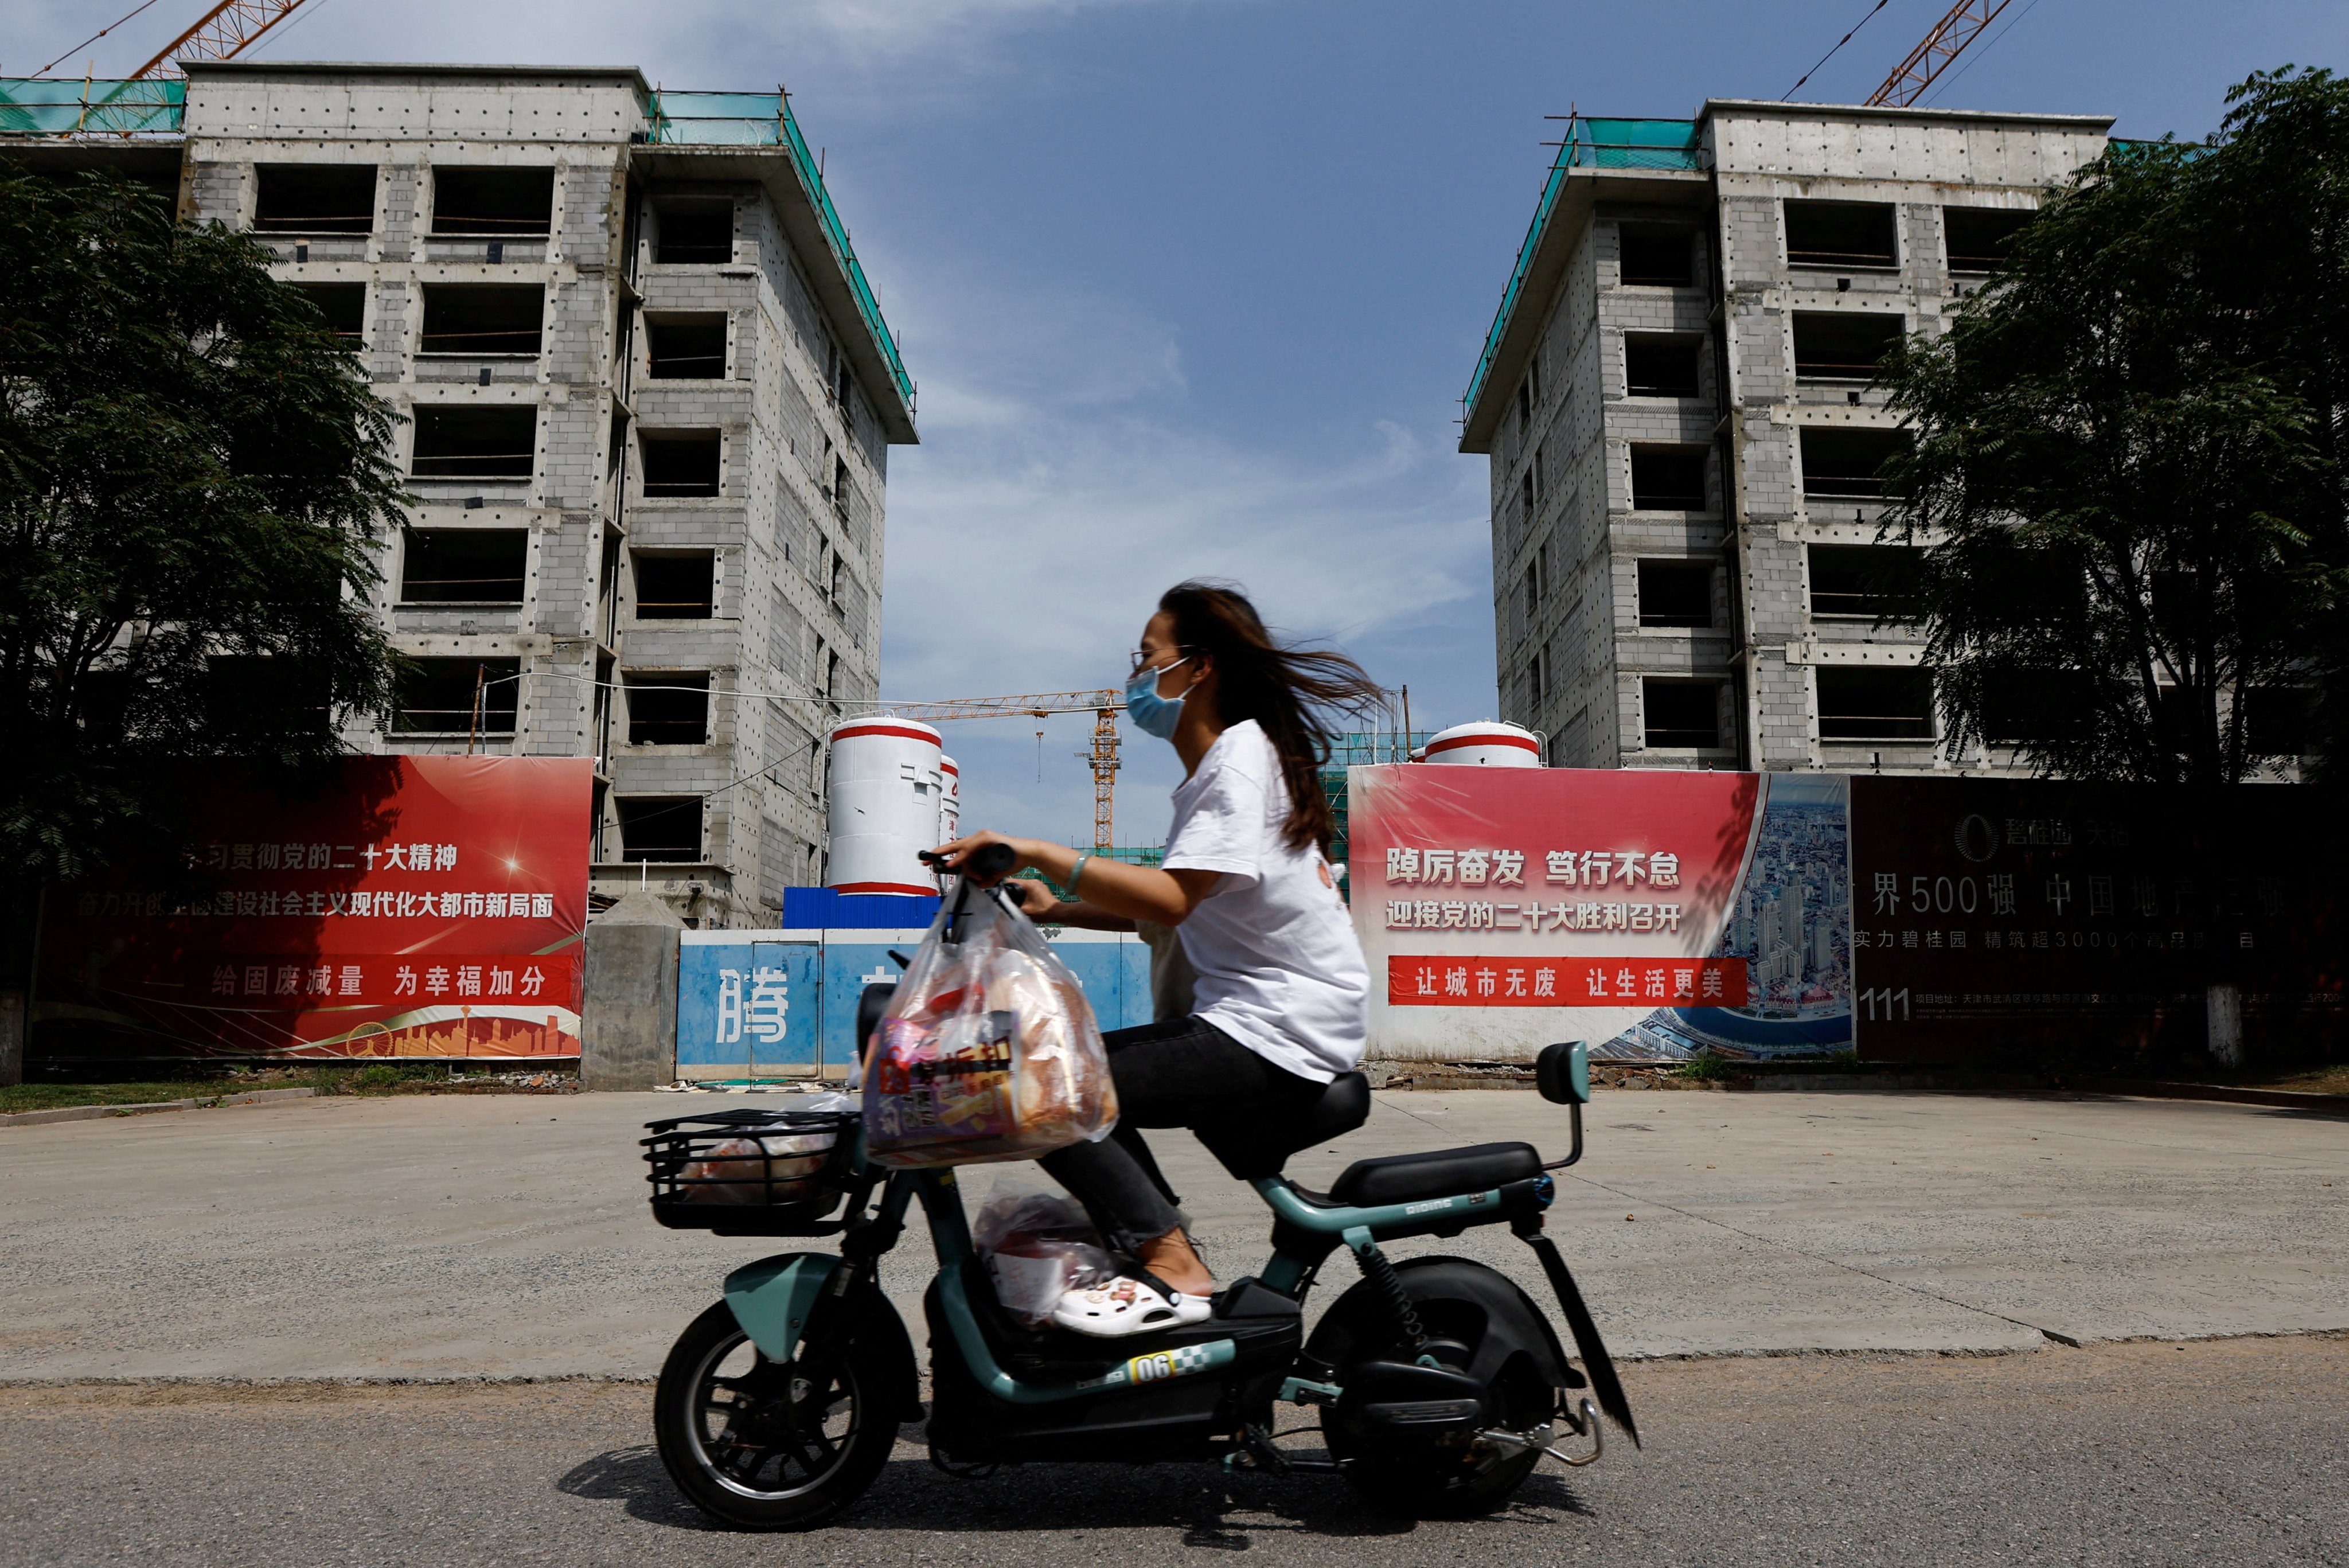 Property investment in China fell by 9.8 per cent in the first four months of the year. Photo: Reuters